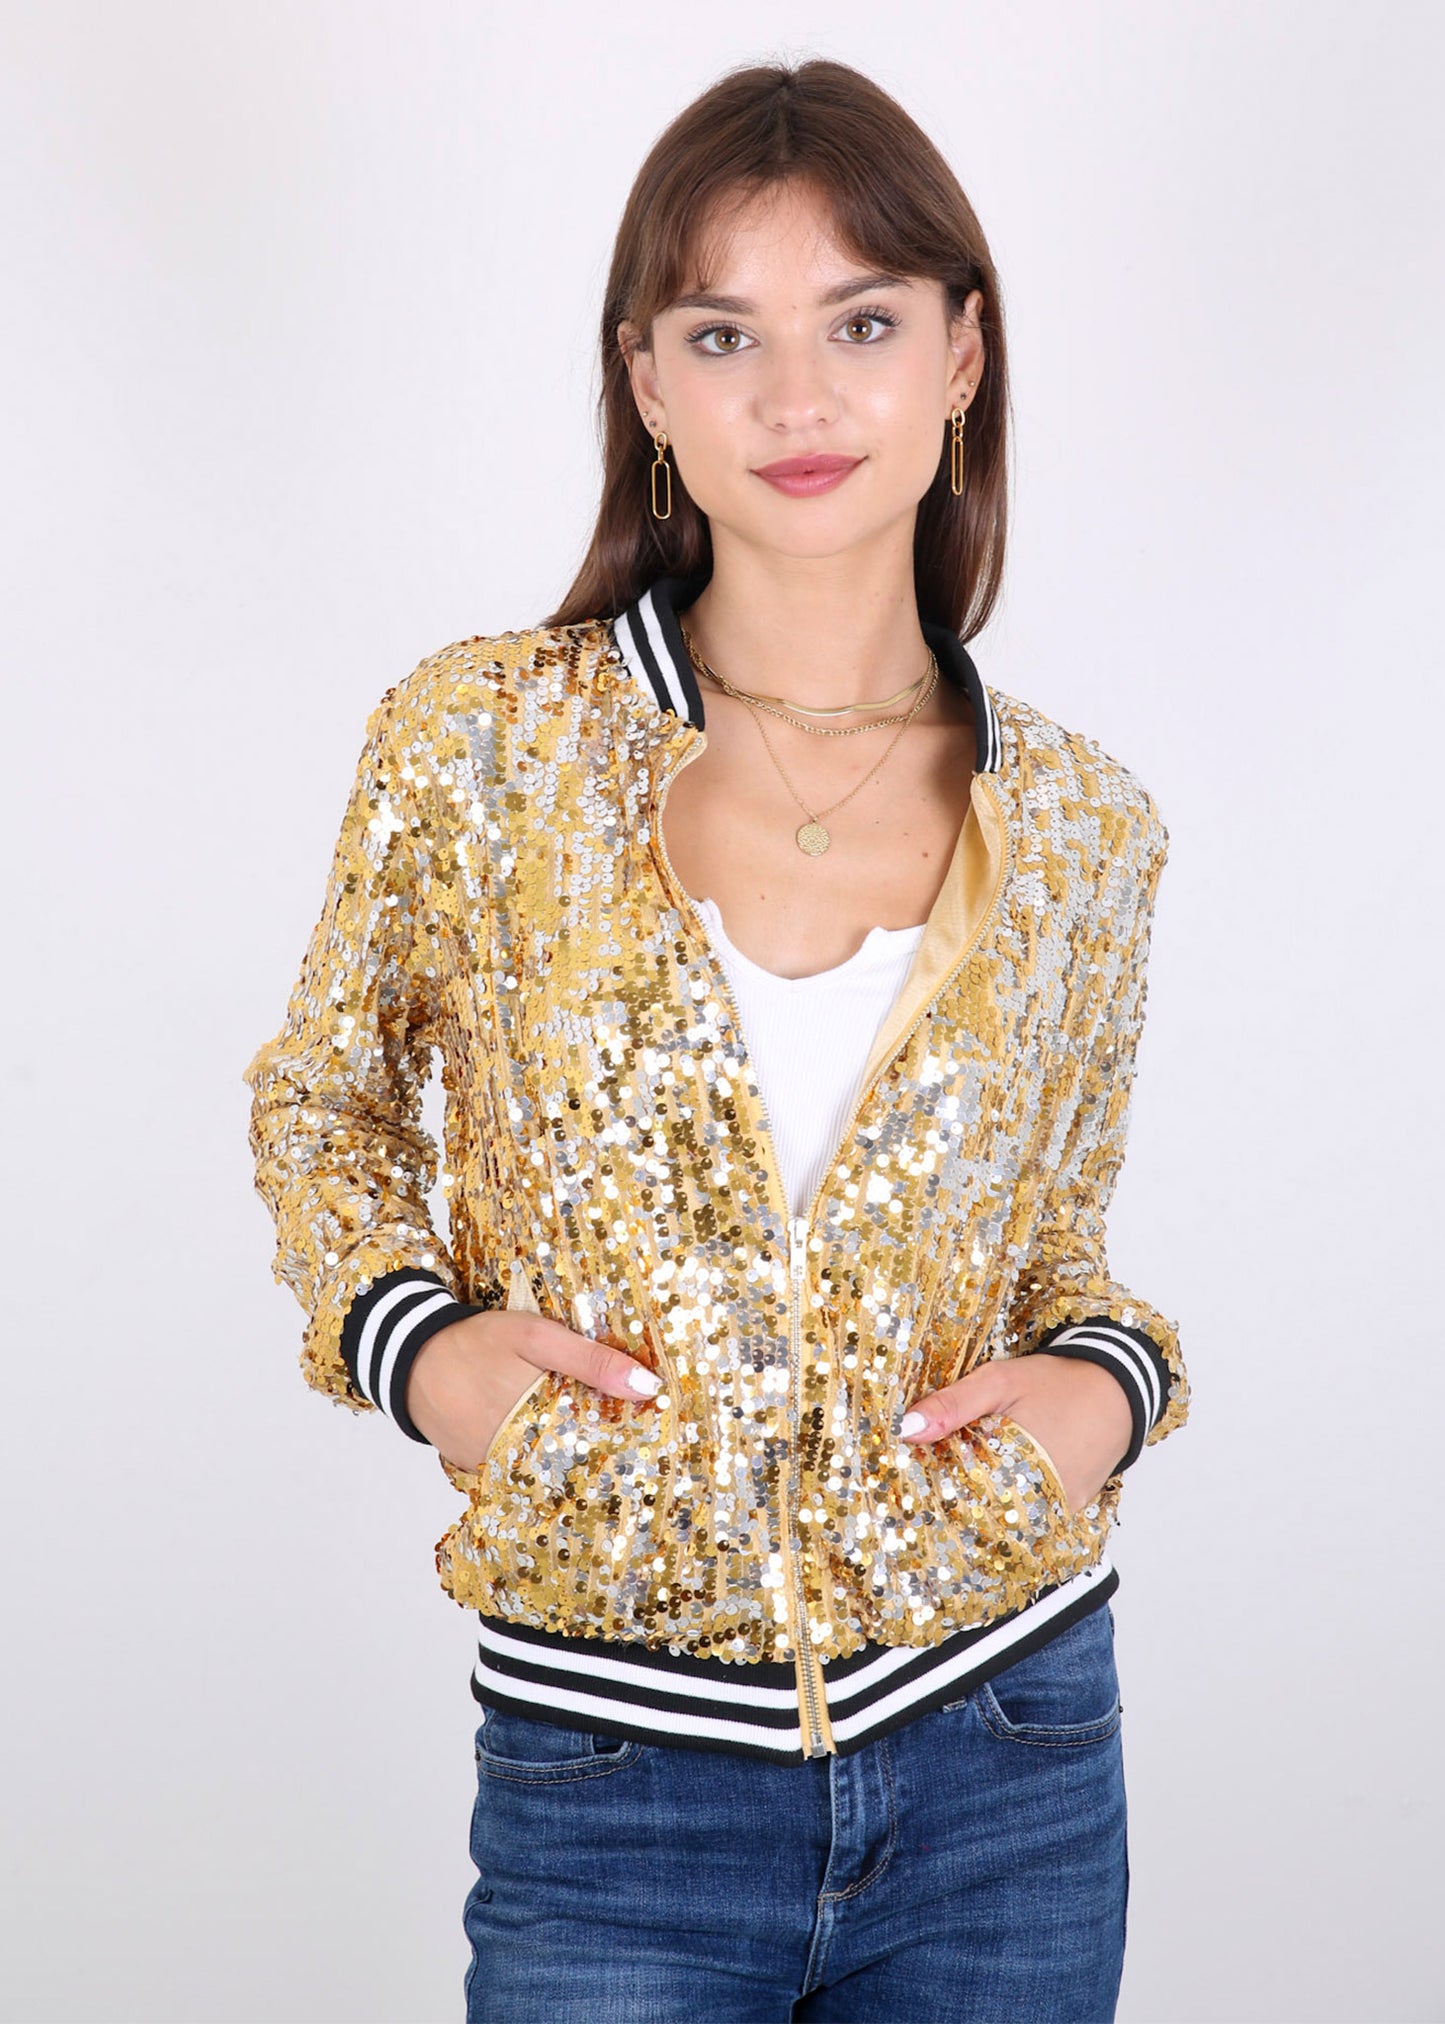 Anna-Kaci Womens Sequin Jacket Sparkle Long Sleeve Front Zip Casual Blazer Bomber Jacket With Pockets